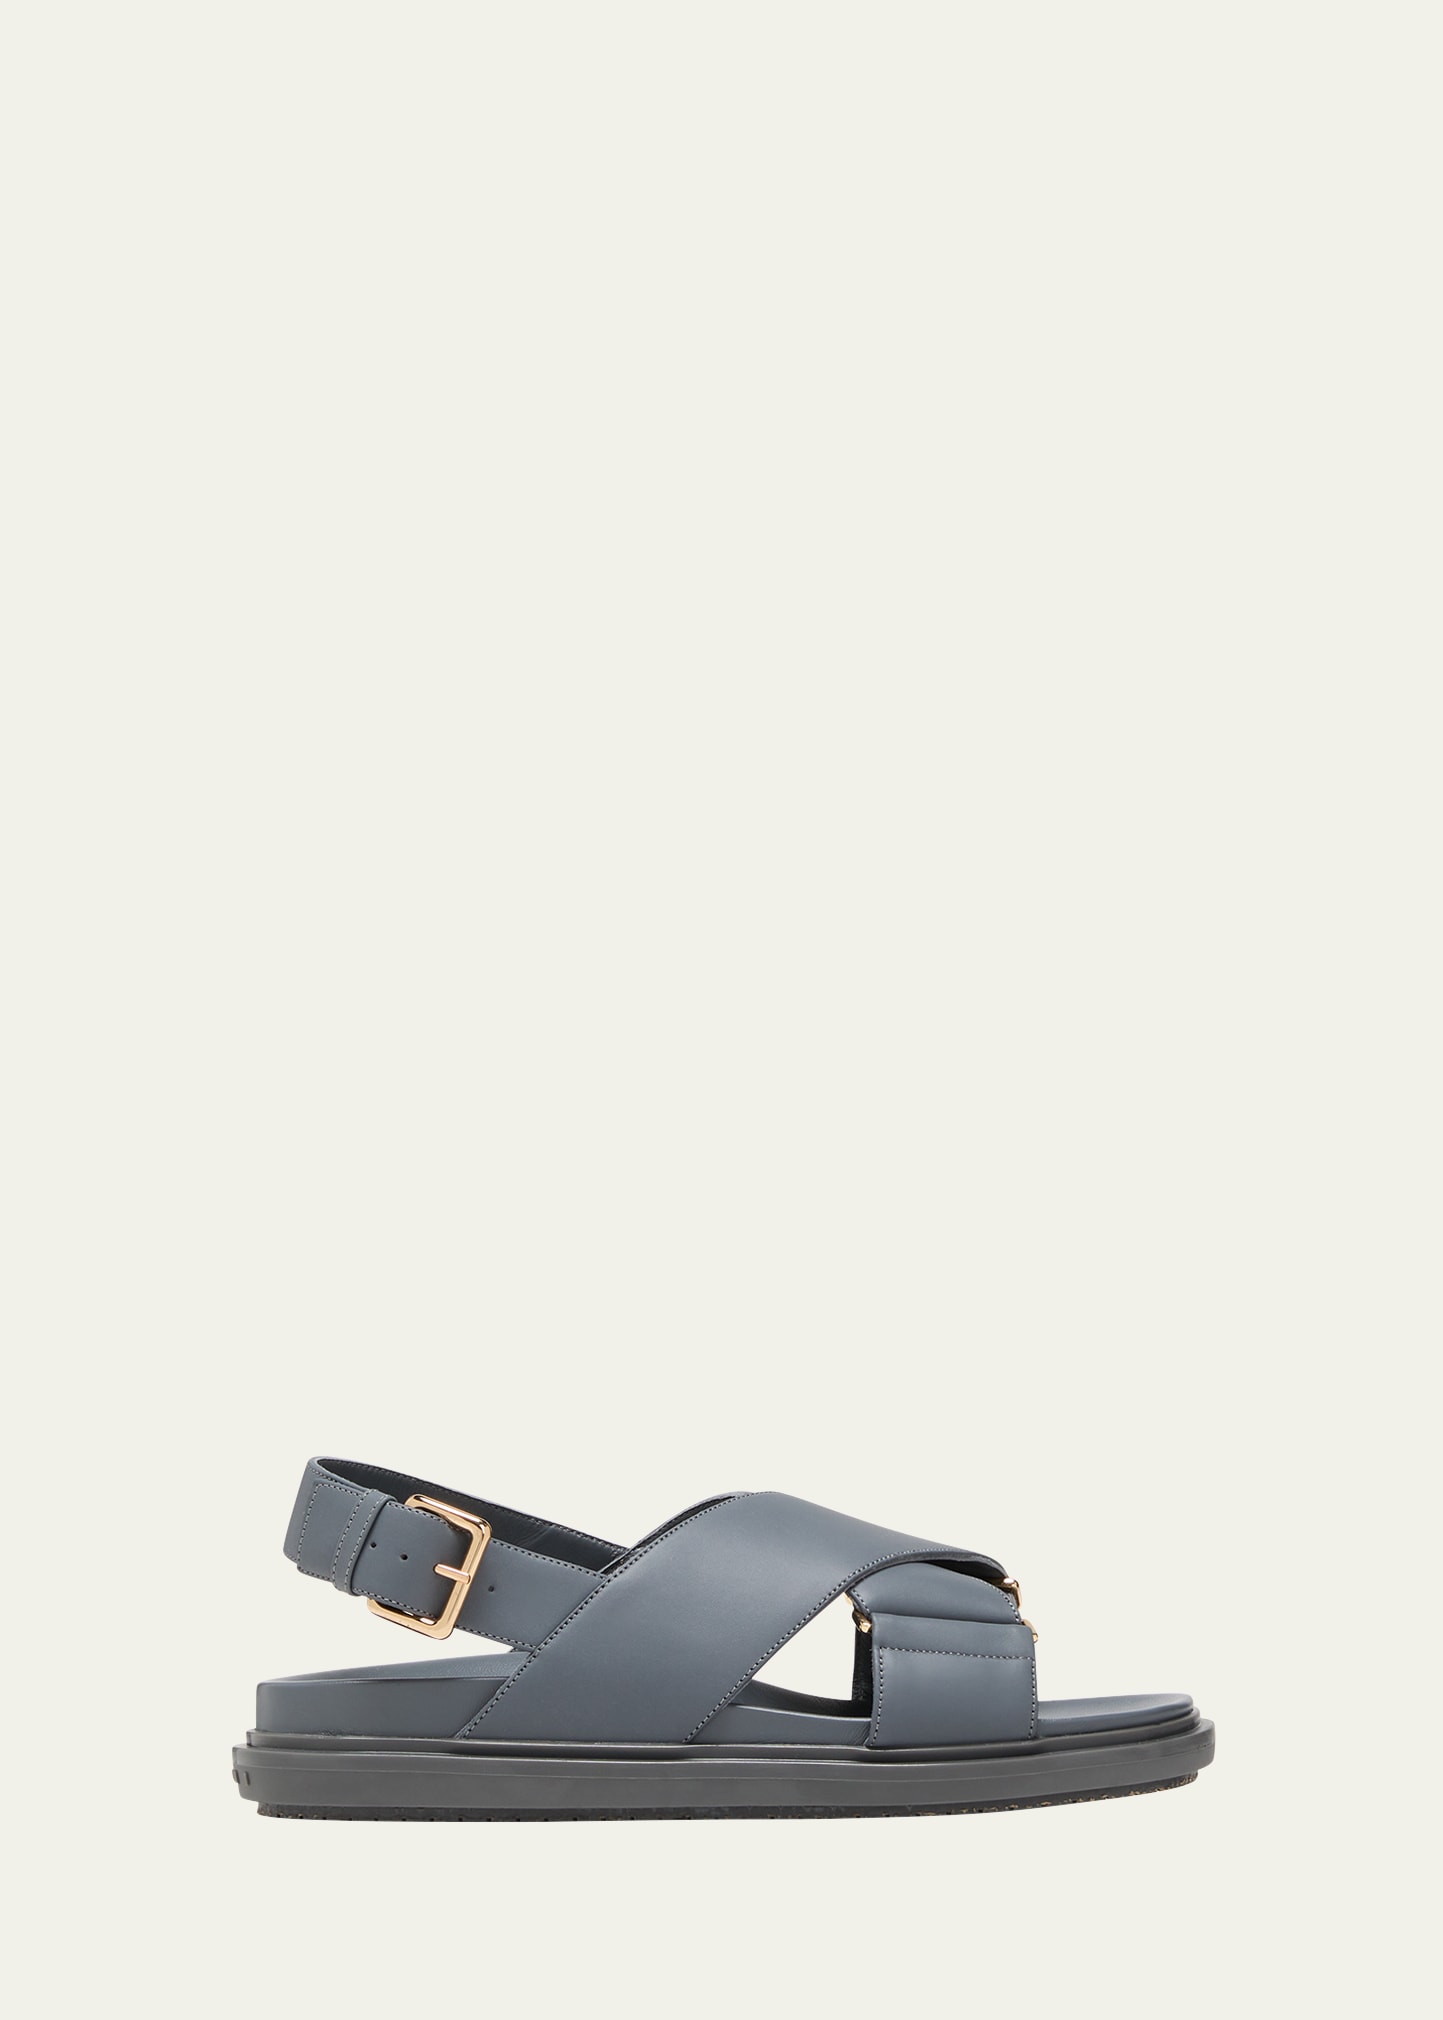 Marni Fussbet Leather Crisscross Sandals In Metal